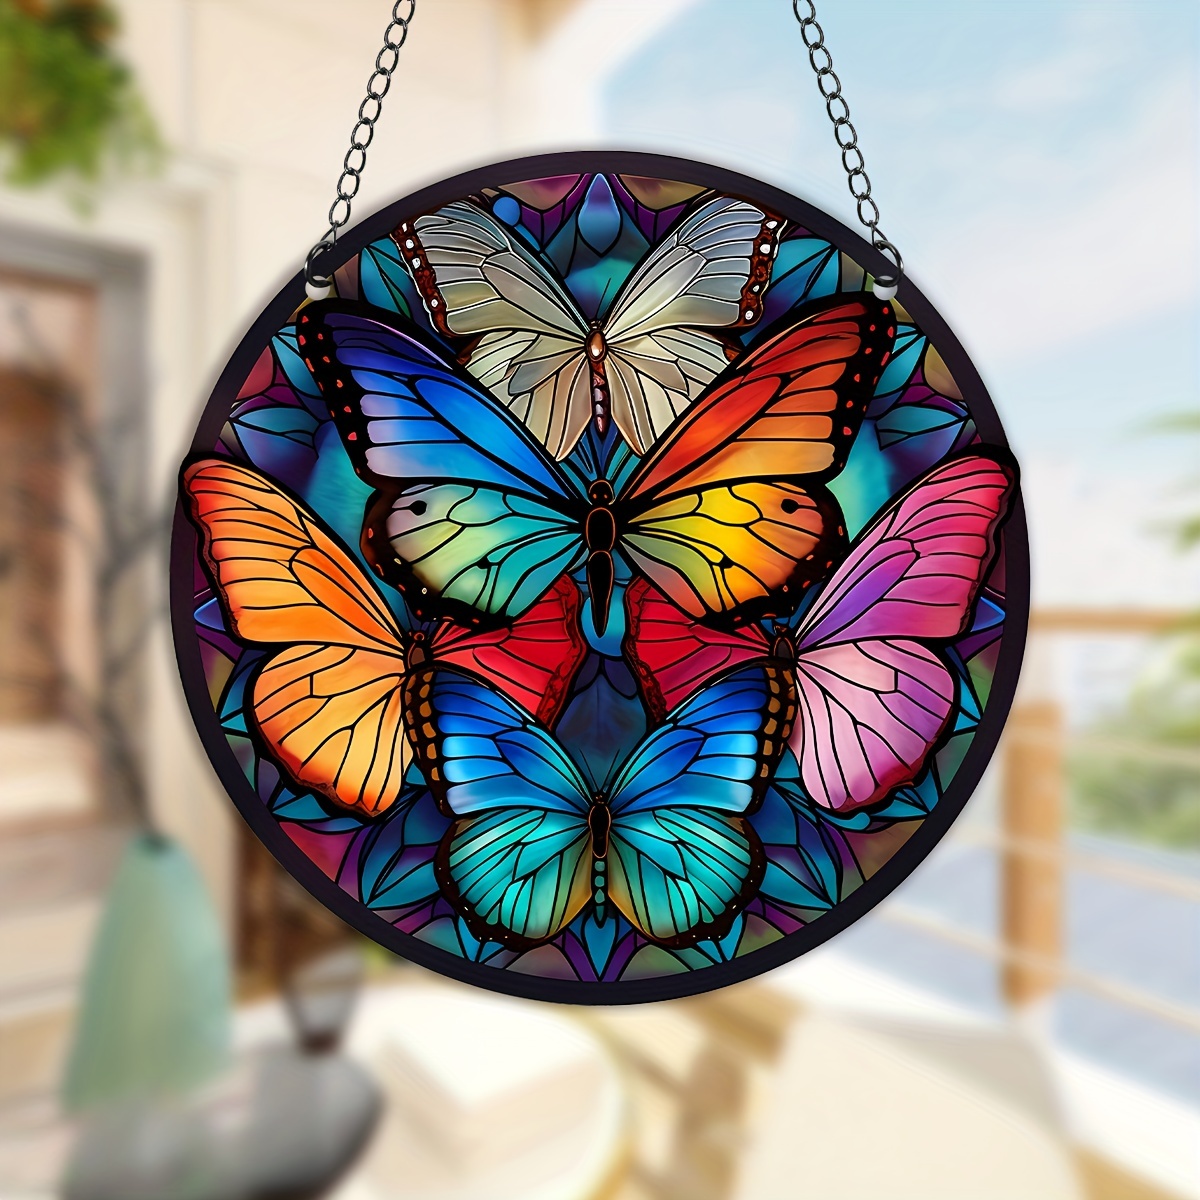 3D Metal Monarch Butterfly Wall Art, Stained Glass Hanging Butterfly Window  Craft Decorations